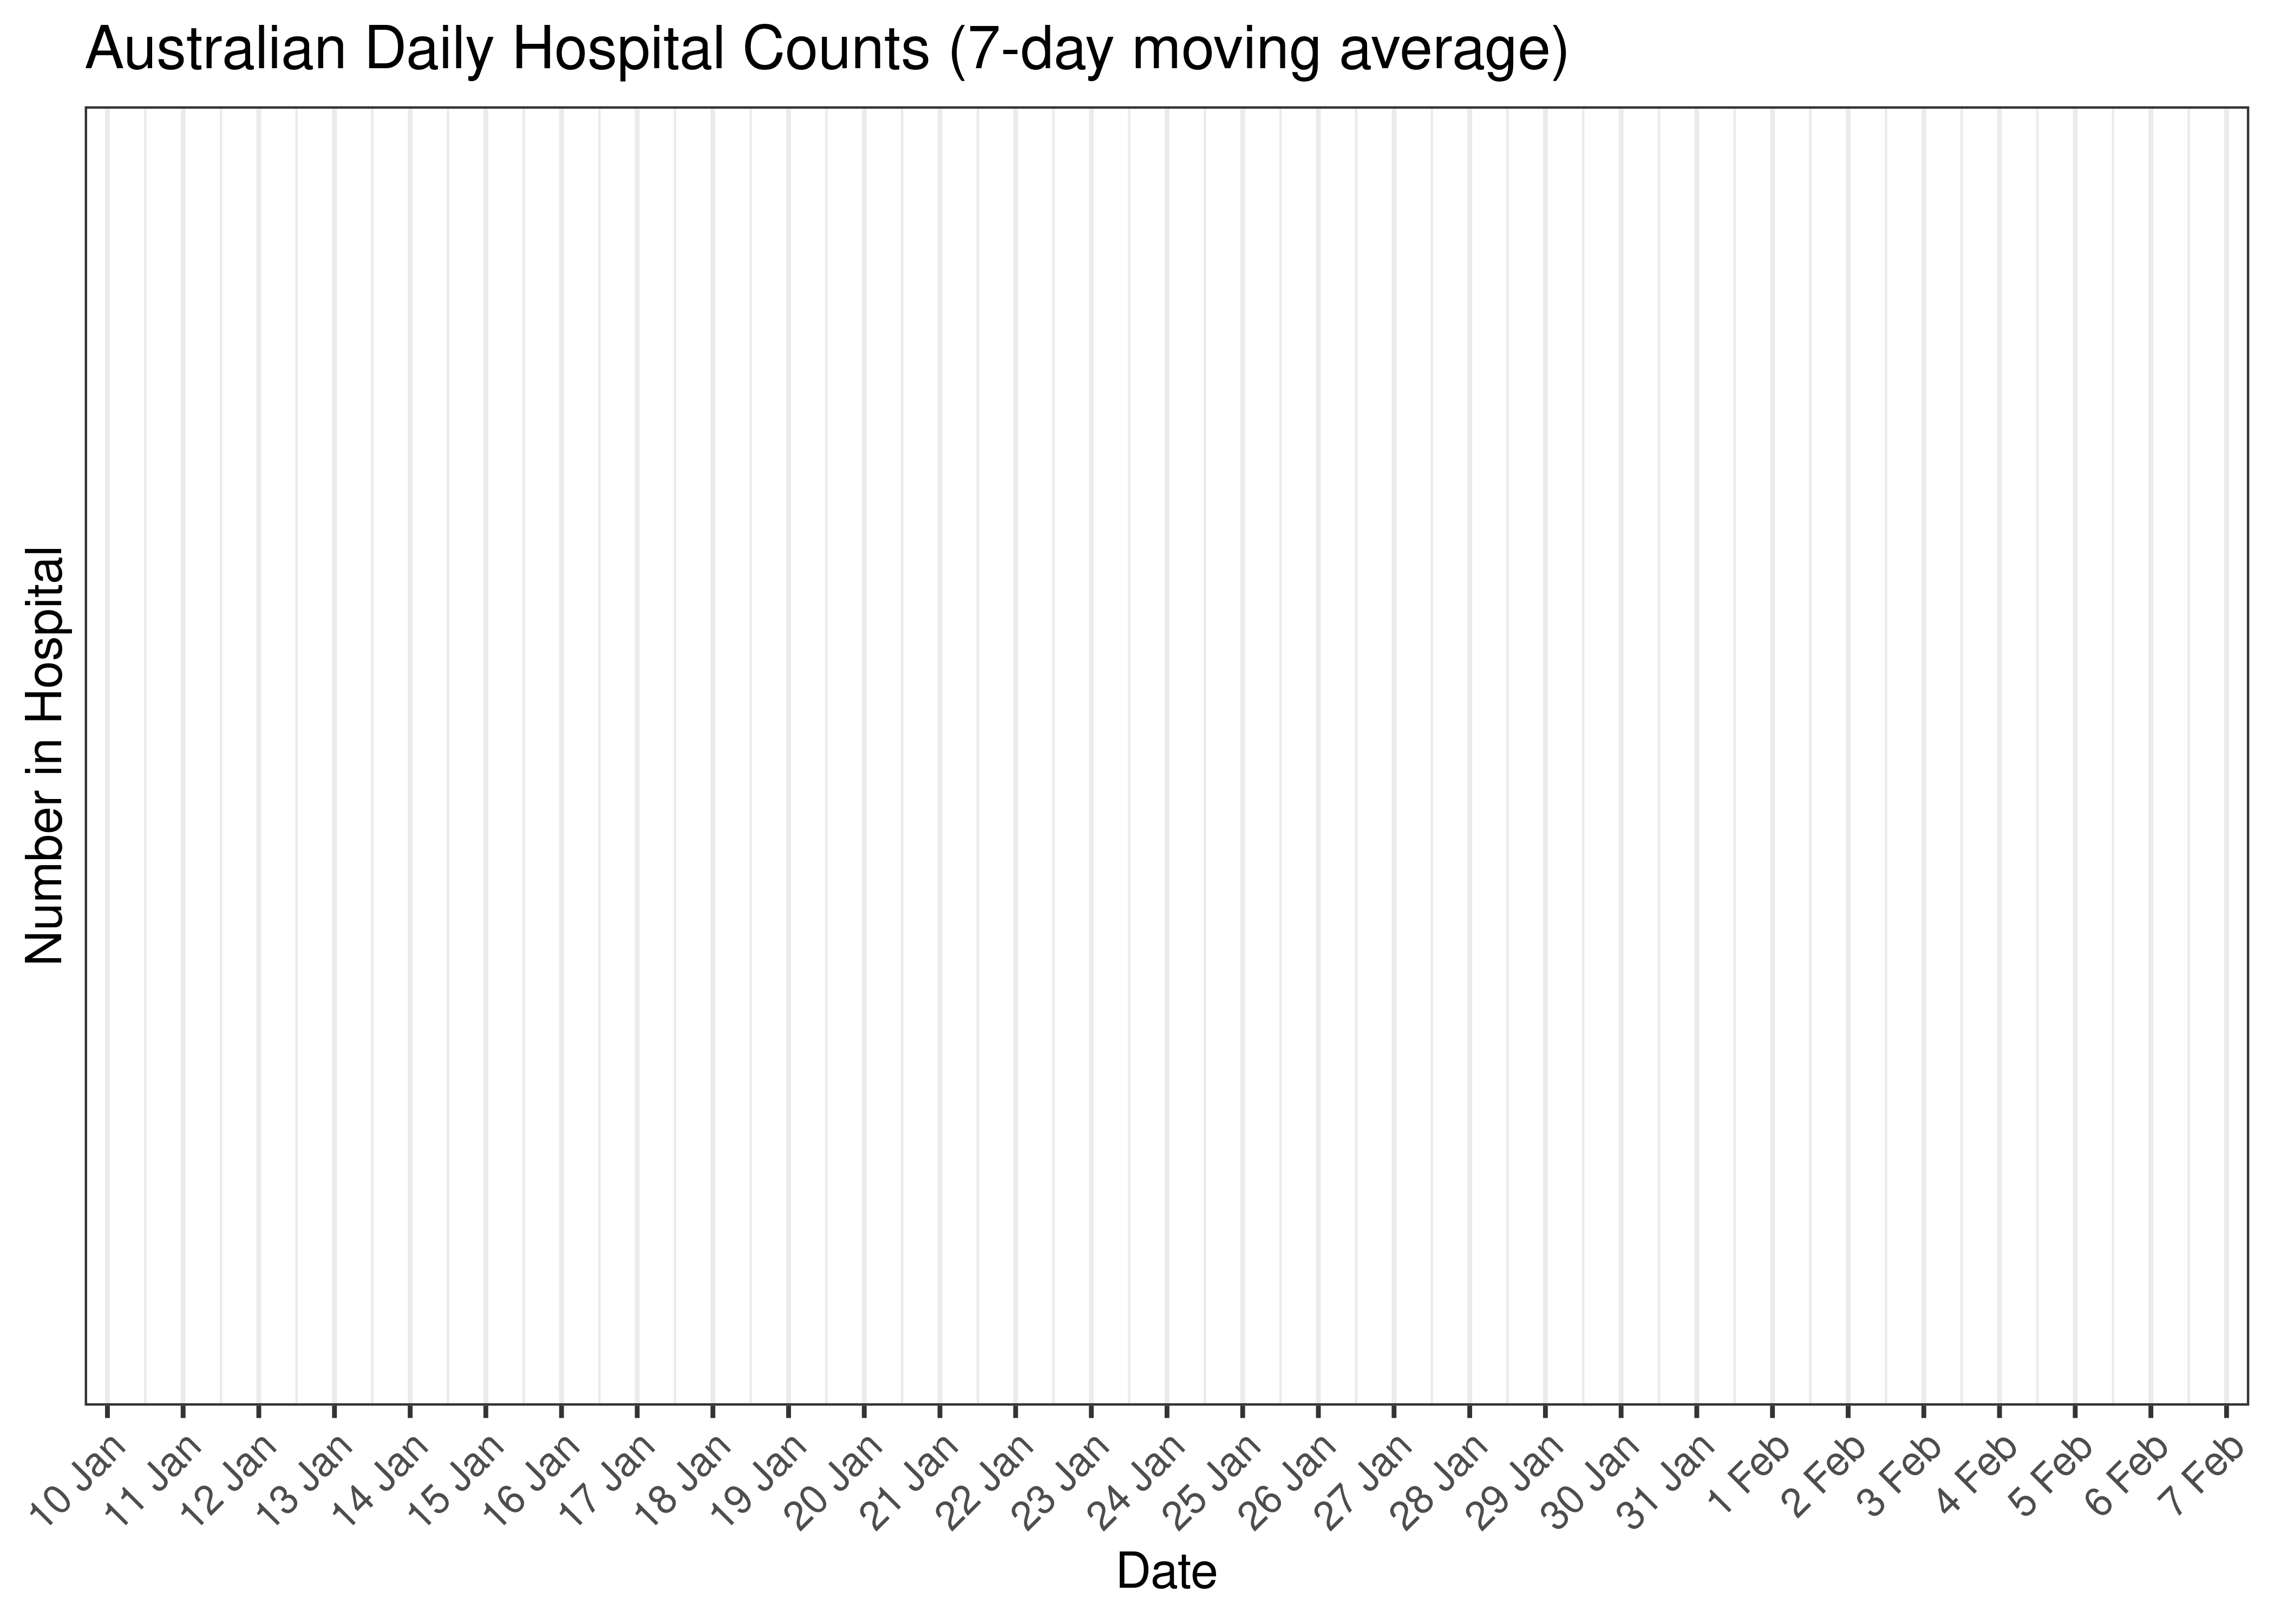 Australian Daily Hospital Counts for Last 30-days (7-day moving average)